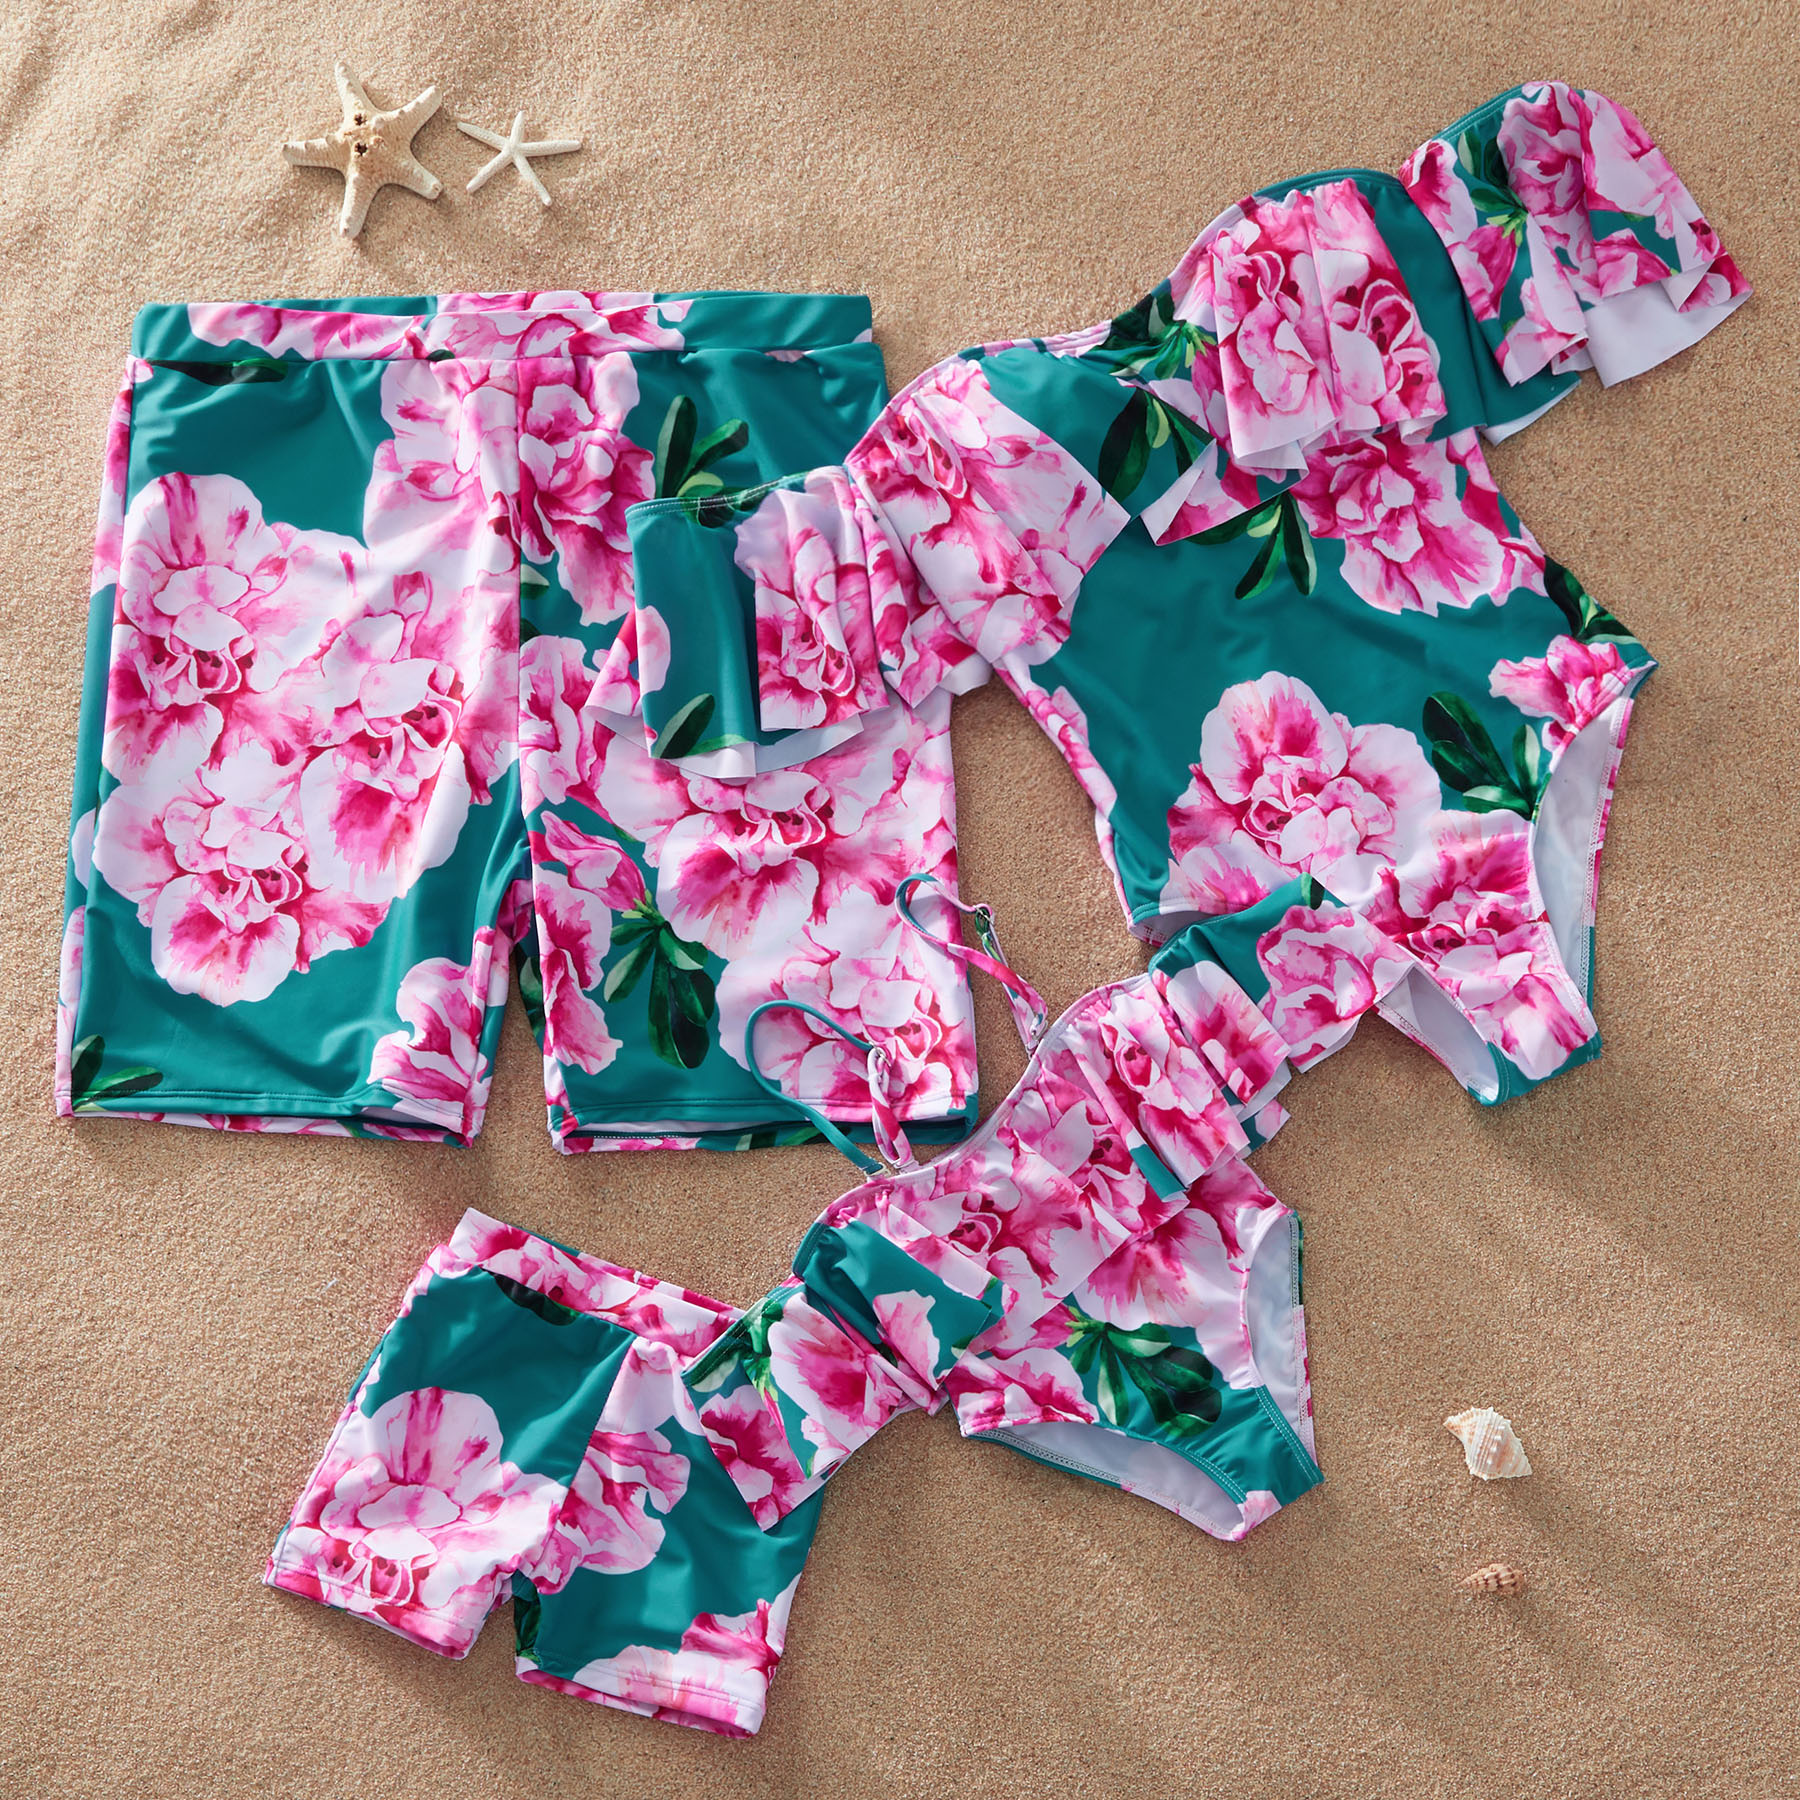 Off-Shoulder One-Piece Family Matching Swimsuit with Big Blossom